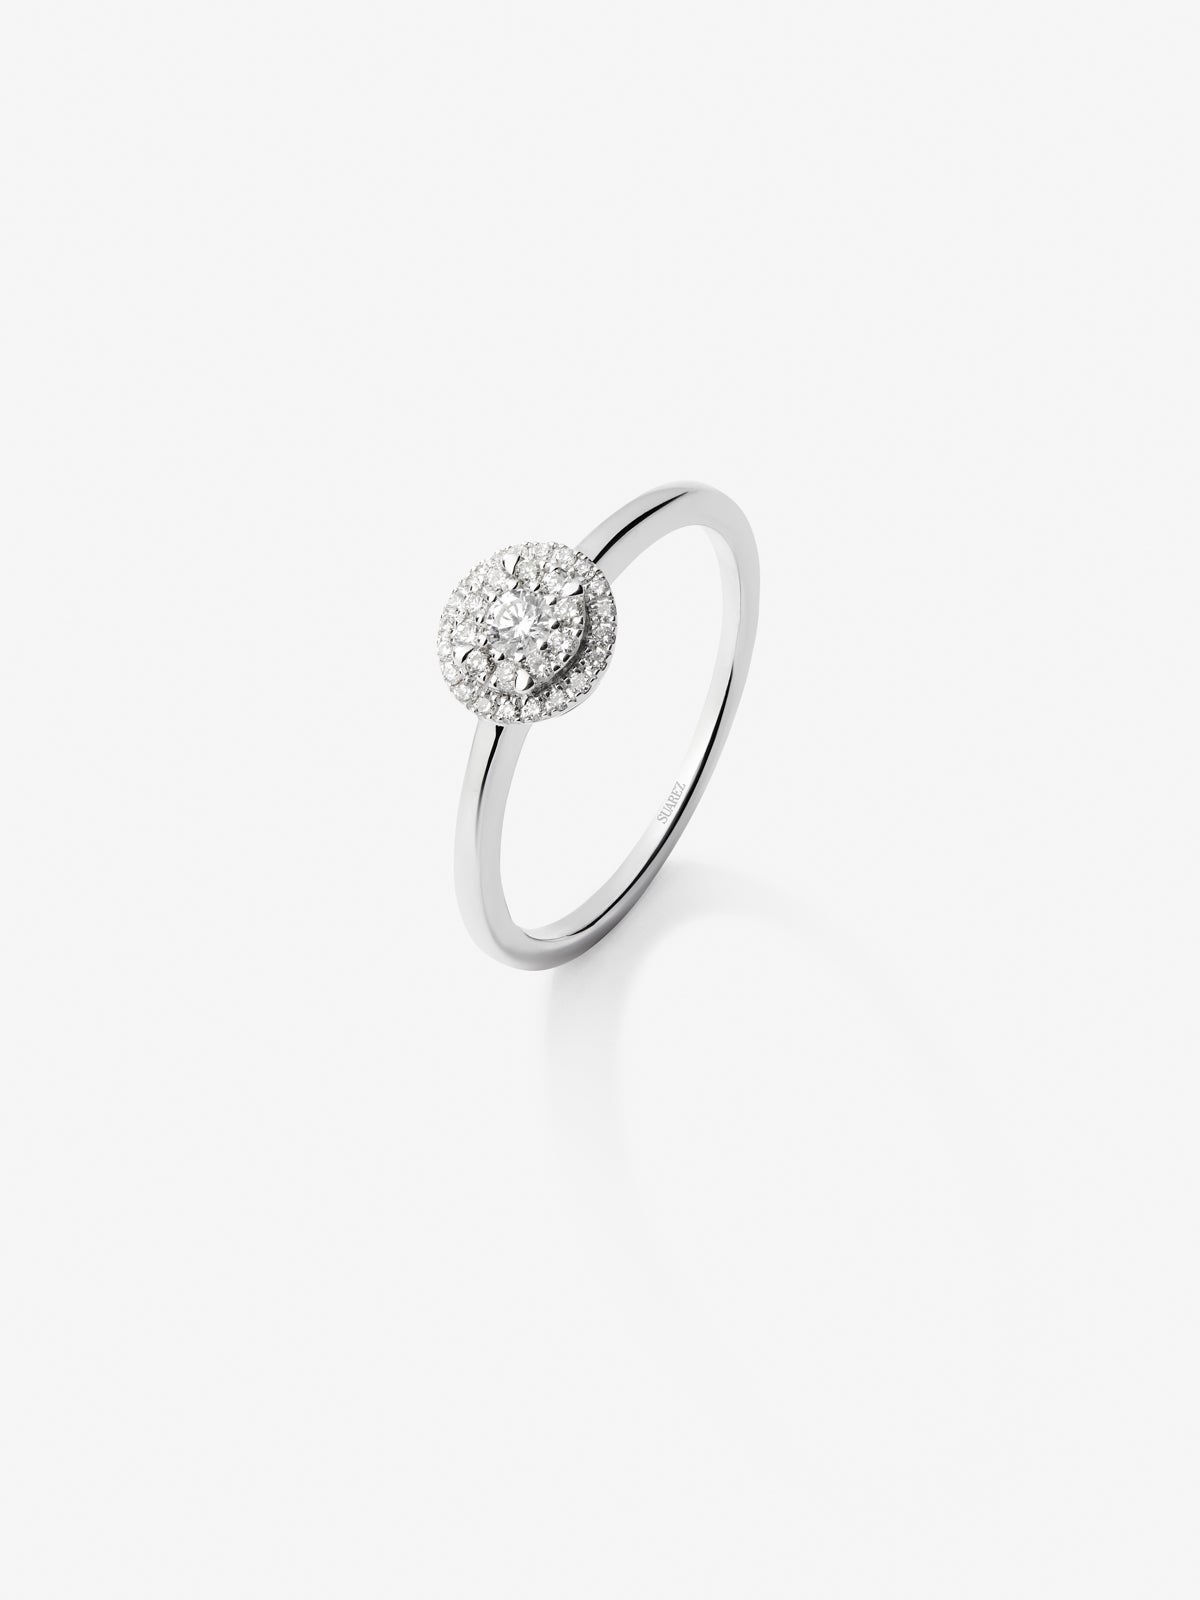 18K white gold ring with 31 brilliant-cut diamonds with a total of 0.19 cts